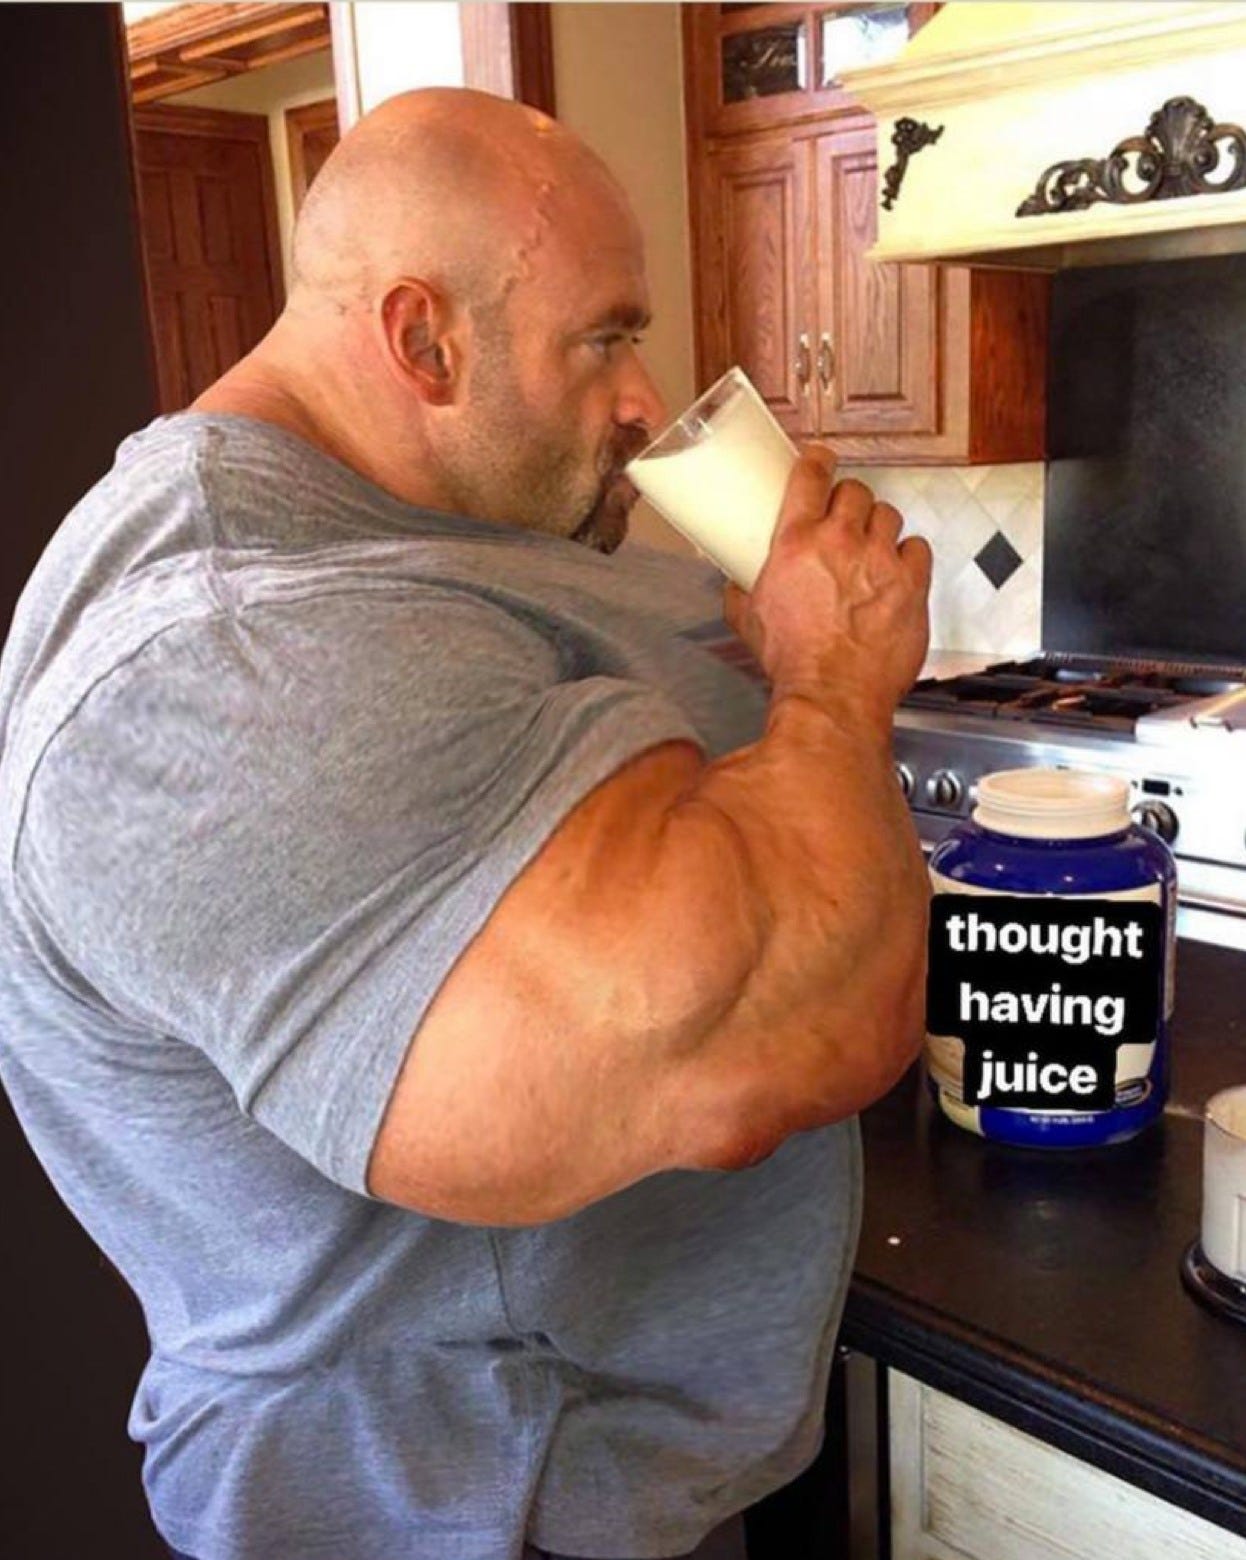 May be an image of 1 person, beard, drink, indoor and text that says "thought having juice"